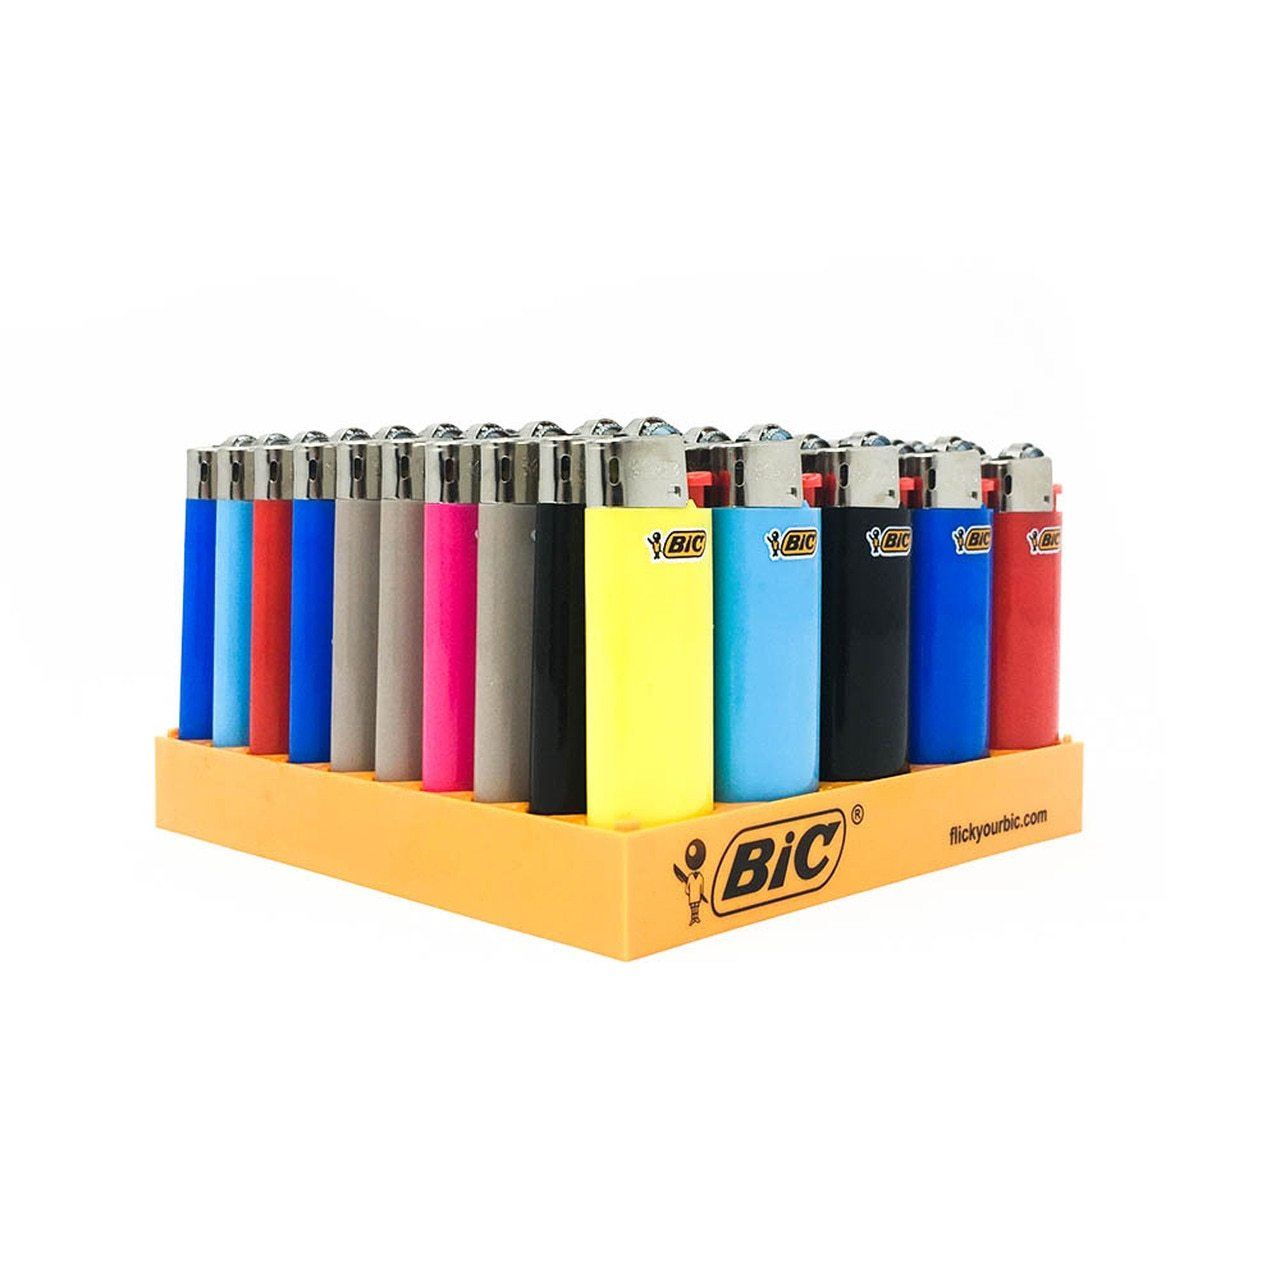 Bic Lighter Mini Classic Assorted Colors (50 Count) Flower Power Packages 